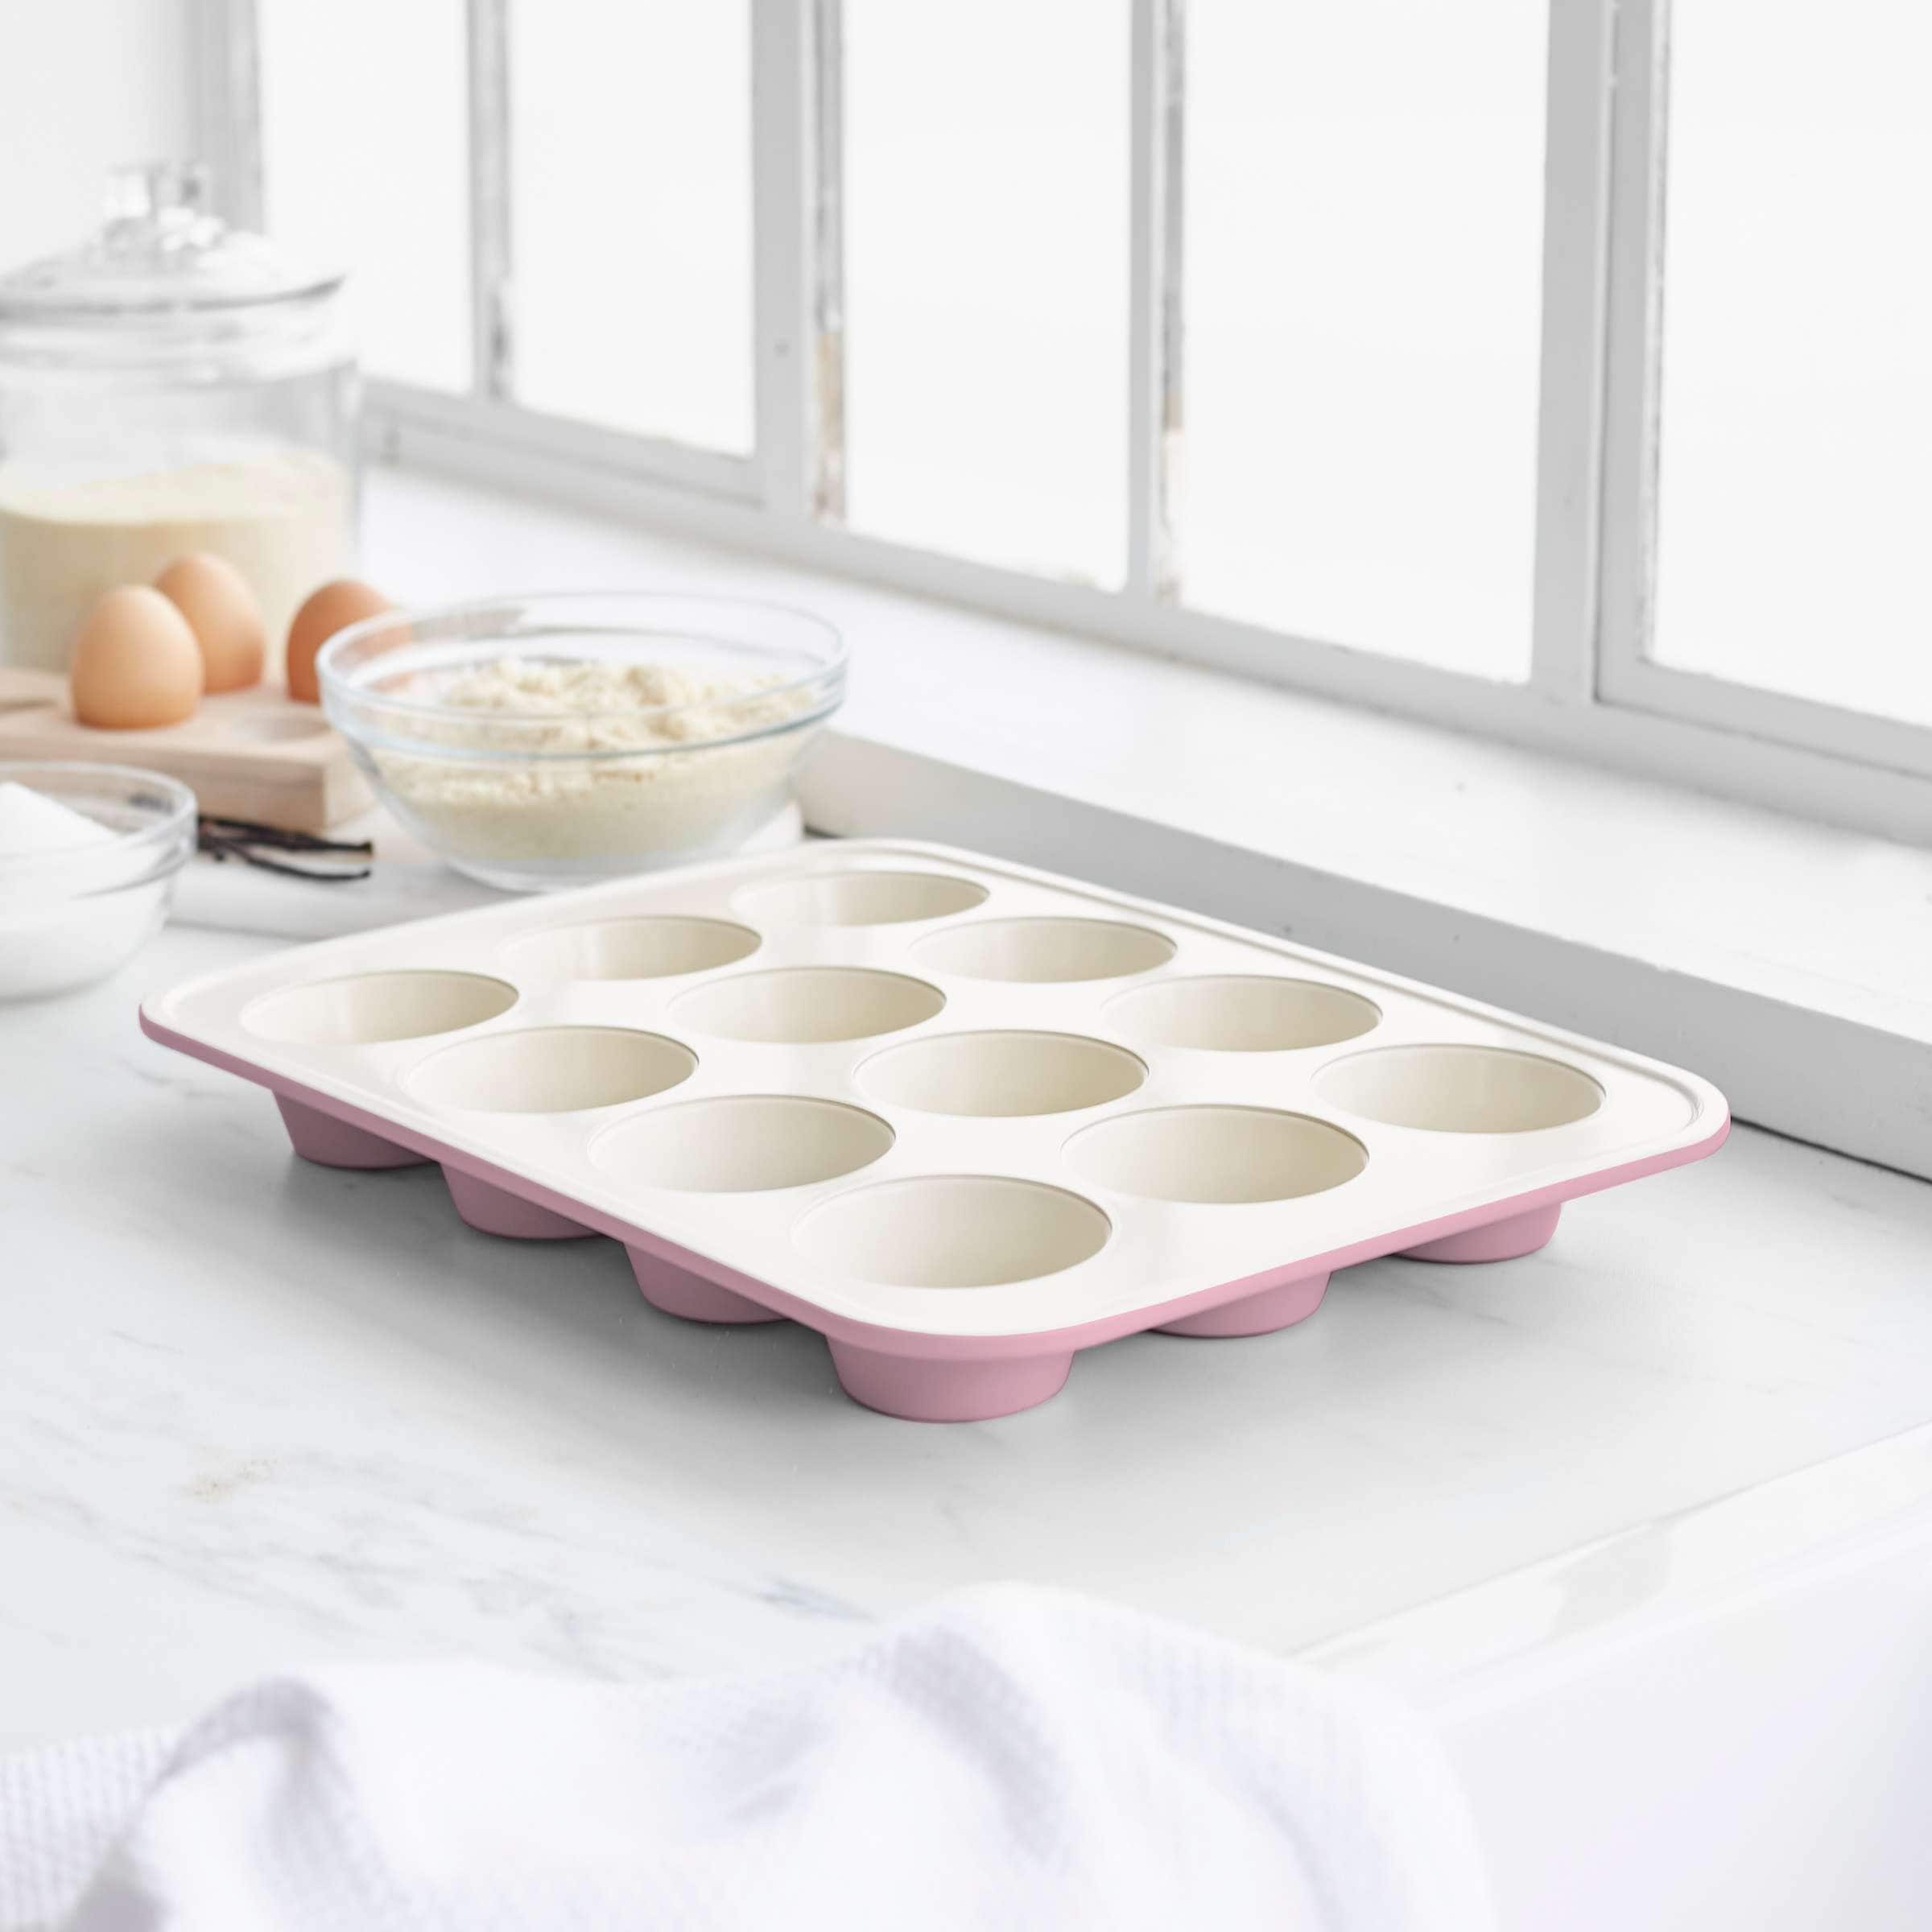 https://ak1.ostkcdn.com/images/products/is/images/direct/3ece31472b7741106550703d9a940aecb19e29b9/GreenLife-Bakeware%2C-12cup-Muffin-Pan.jpg